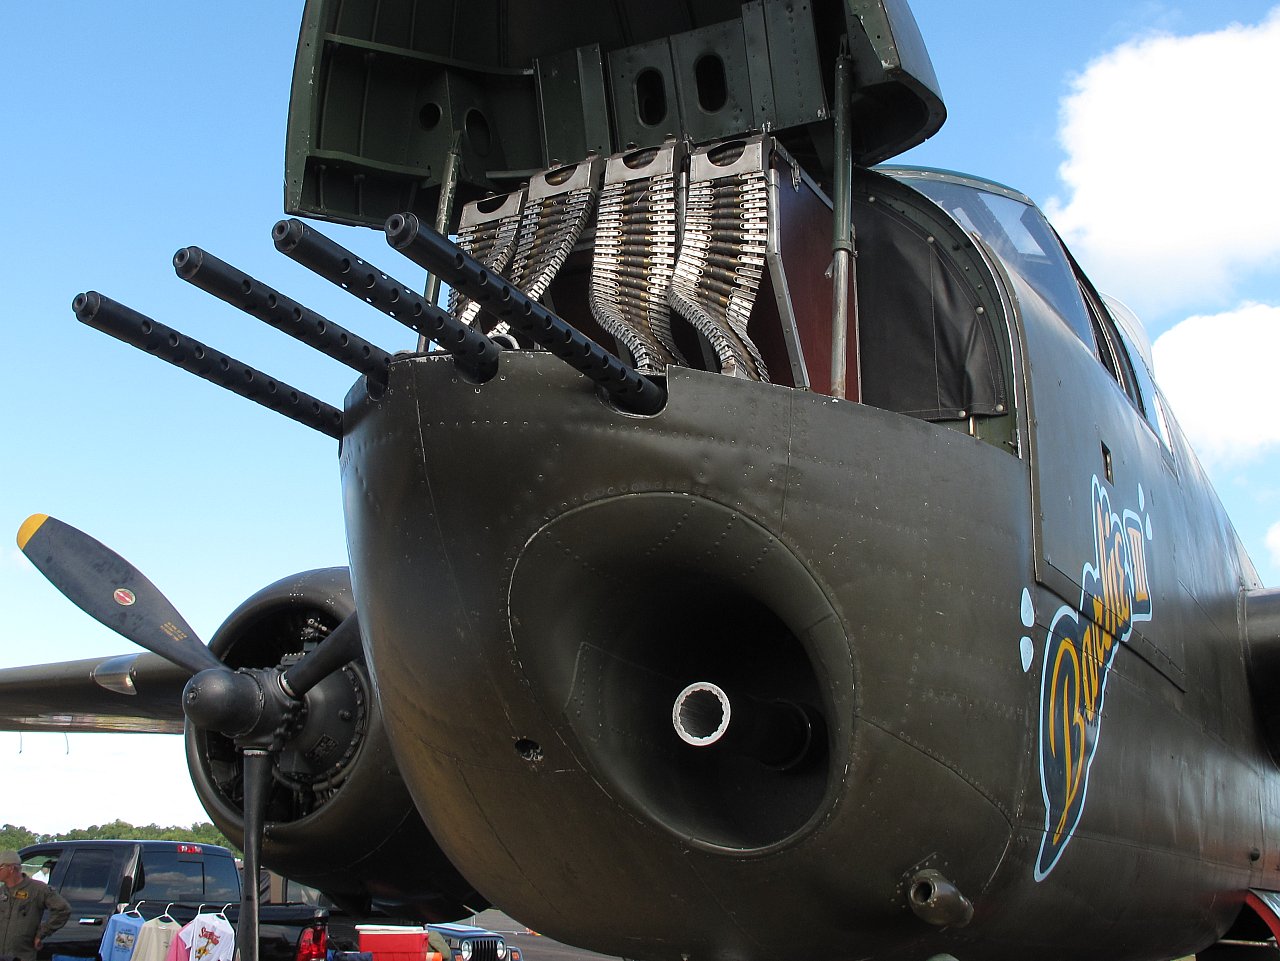 B-25"Barbie III" with nose canopy open, showing the 4 - .50 cal Browning feeds, and 75mm M5 gun